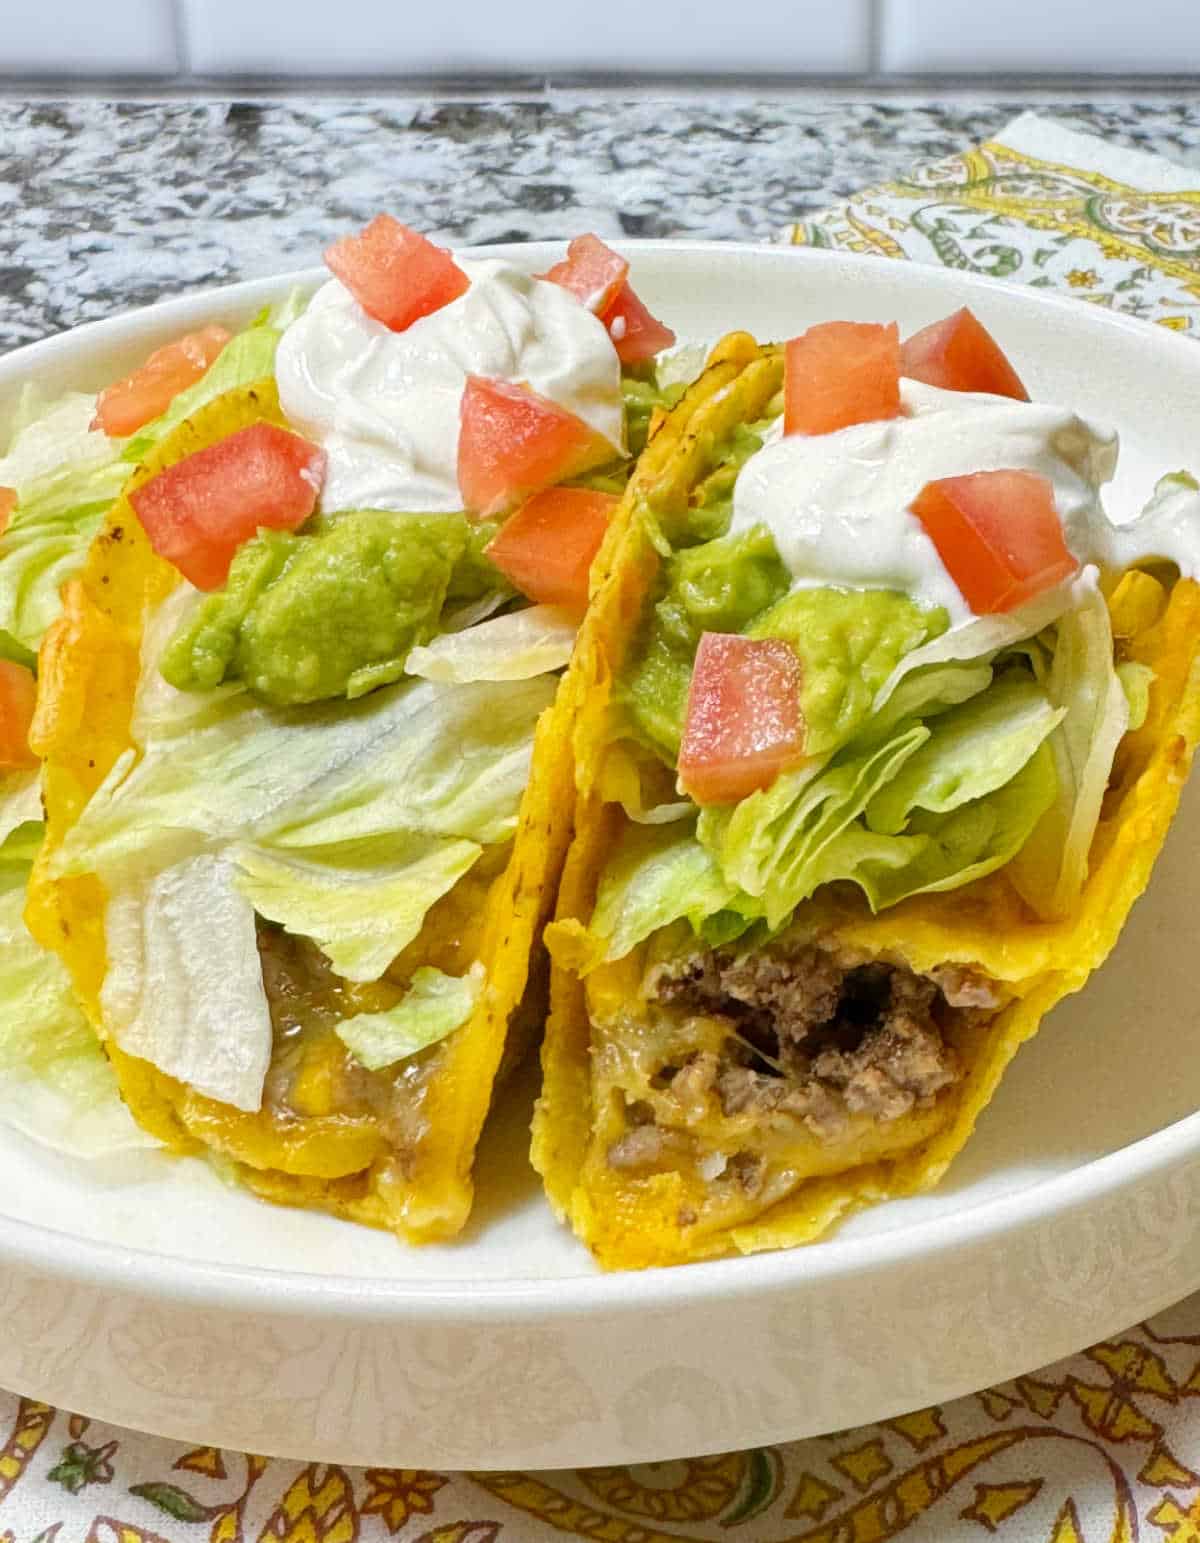 two baked tacos with ground beef and taco toppings on a dish.